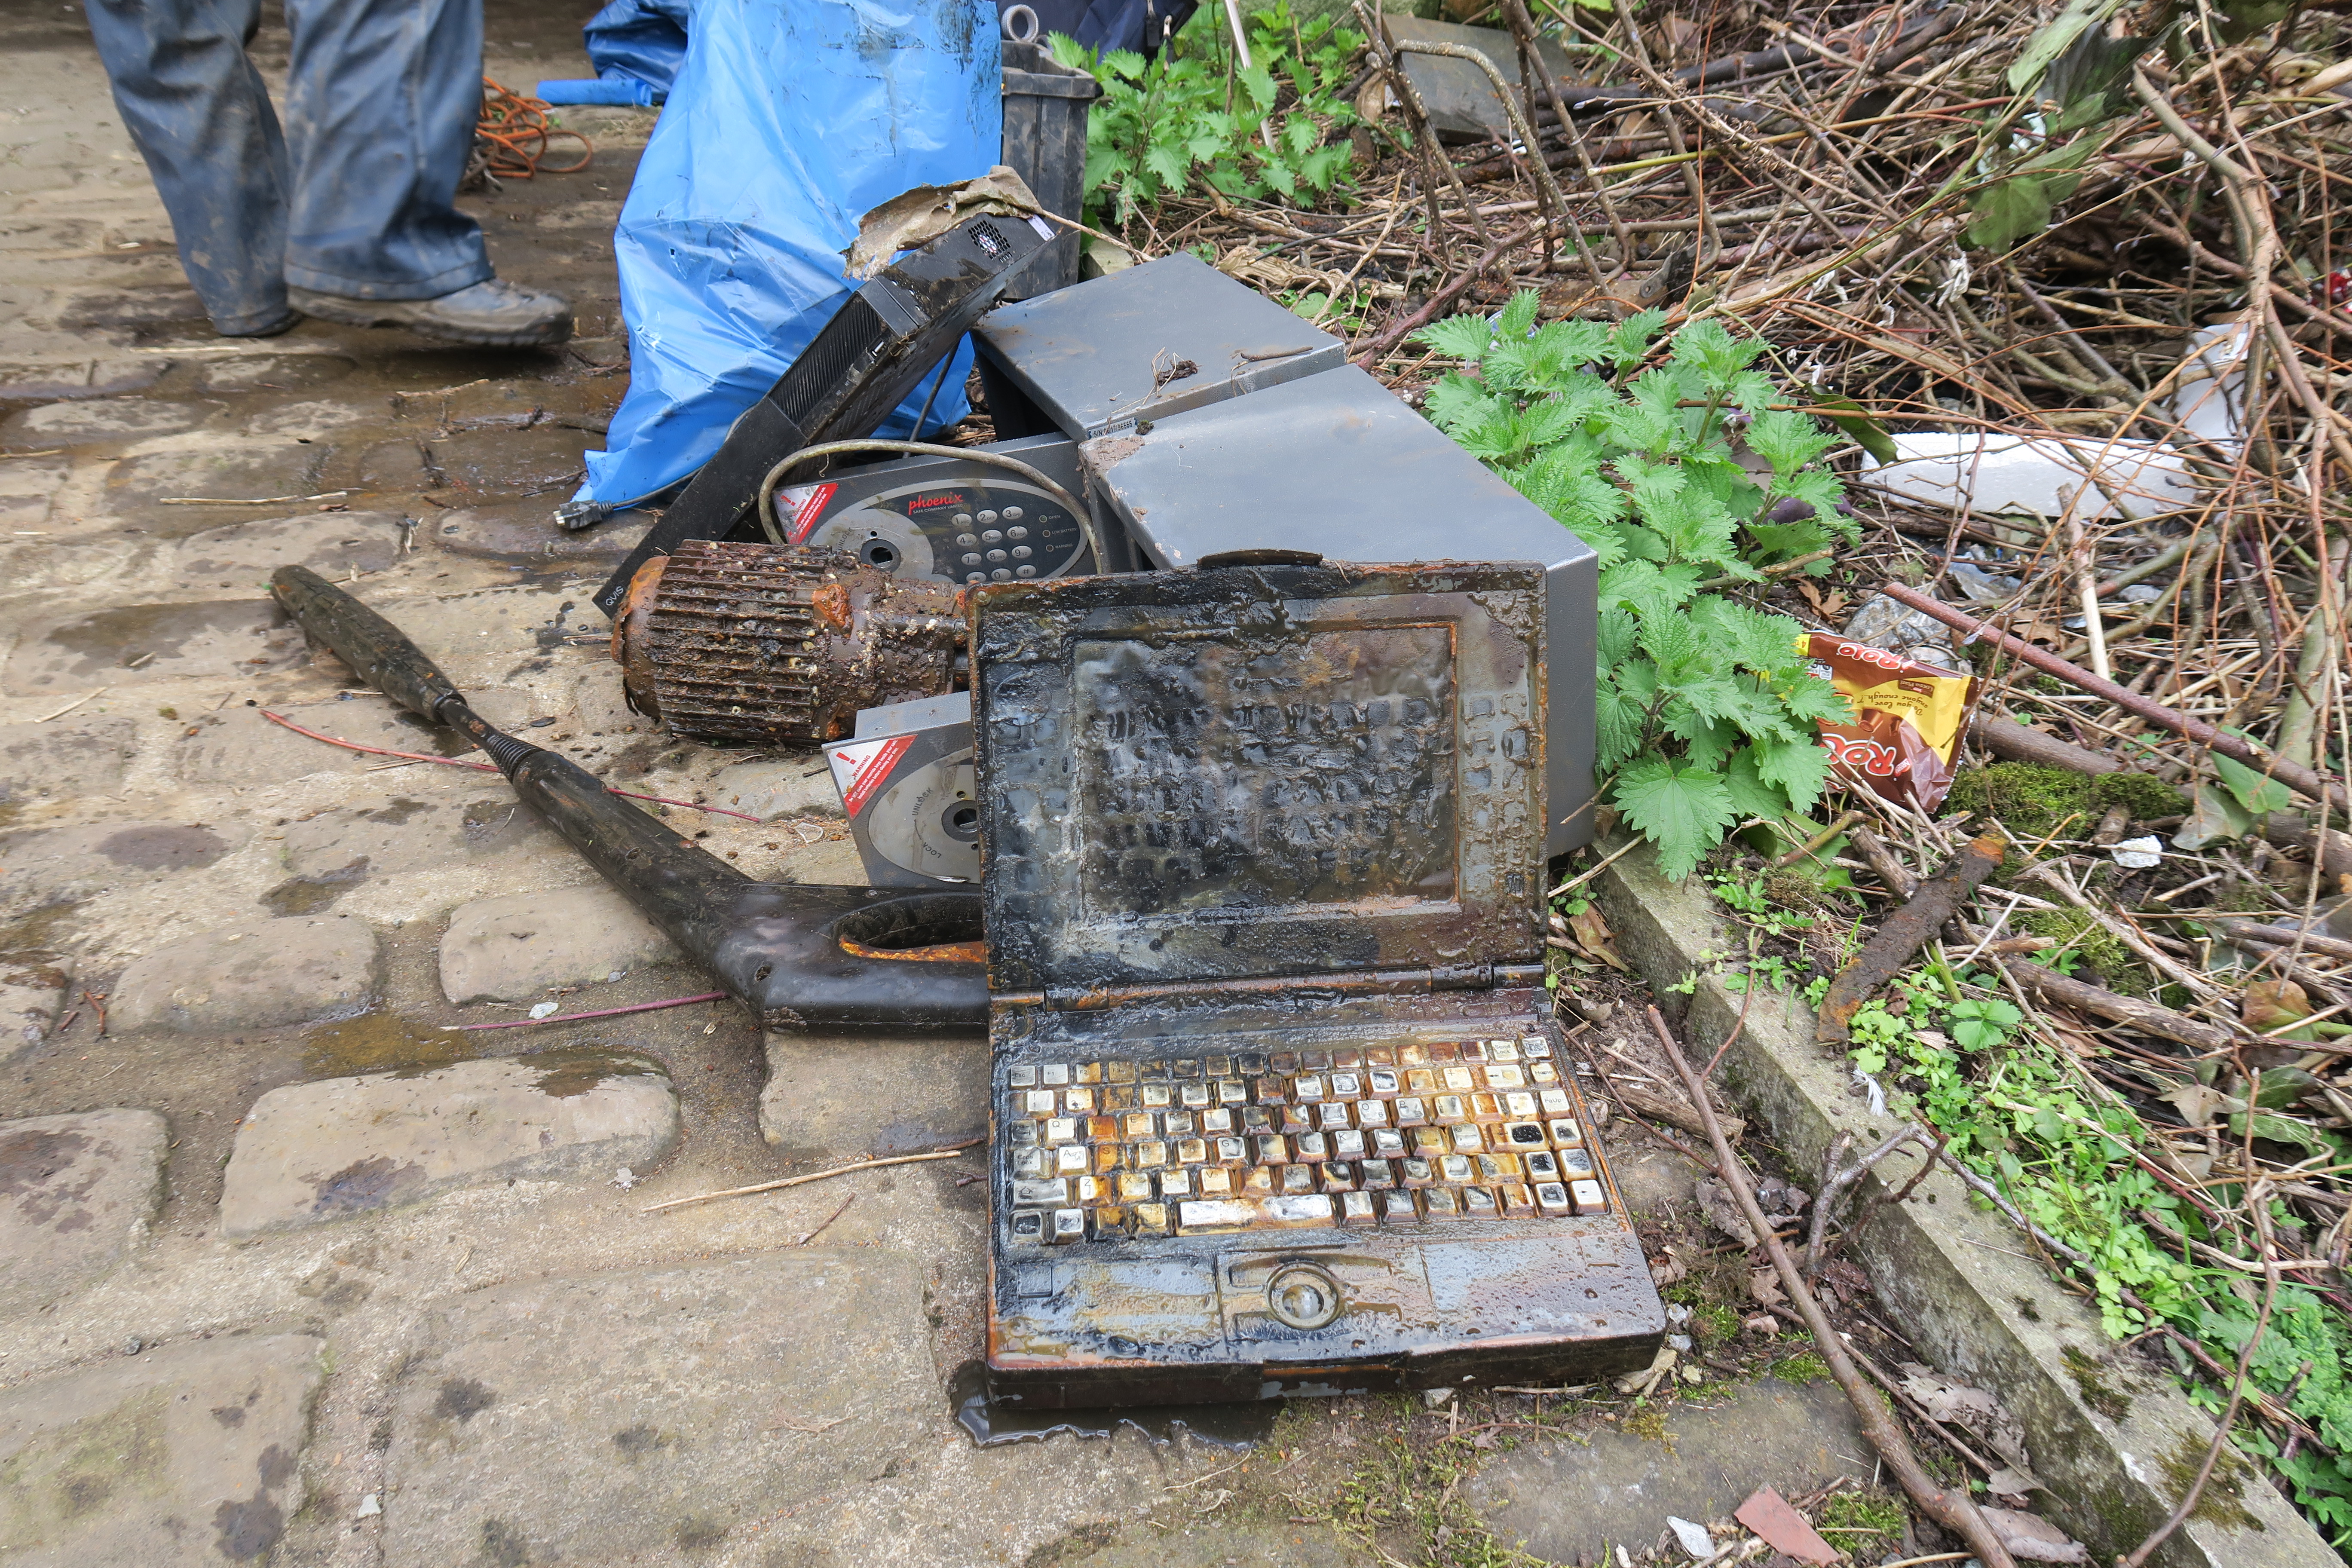 Old laptop and junk pulled out of the Manchester canal by Leeds Magneters